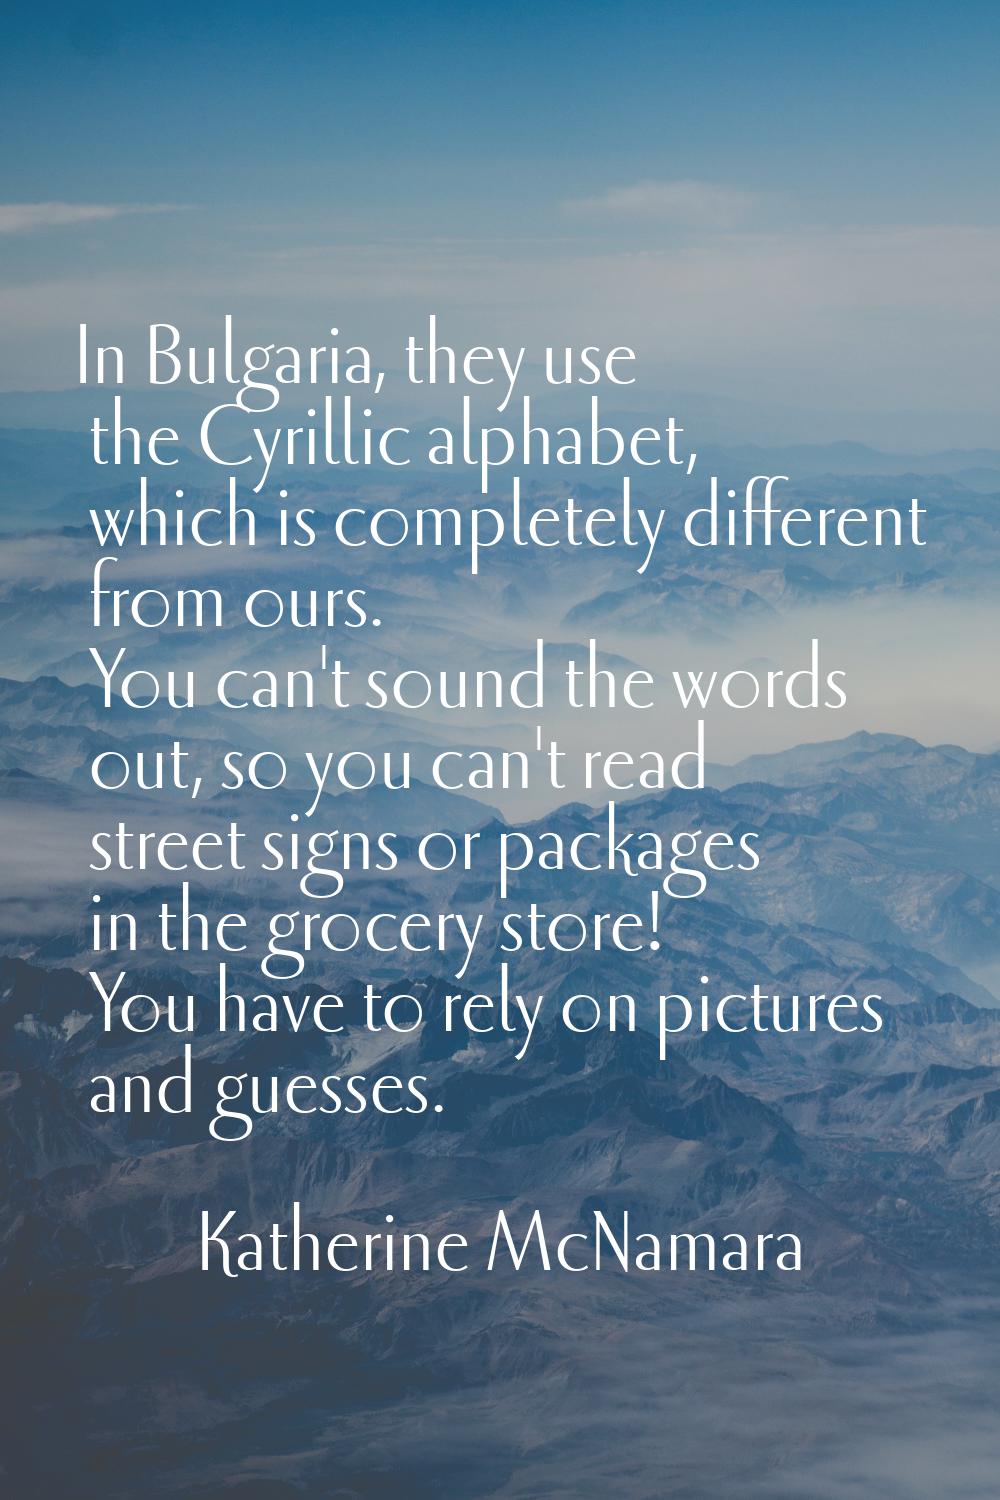 In Bulgaria, they use the Cyrillic alphabet, which is completely different from ours. You can't sou